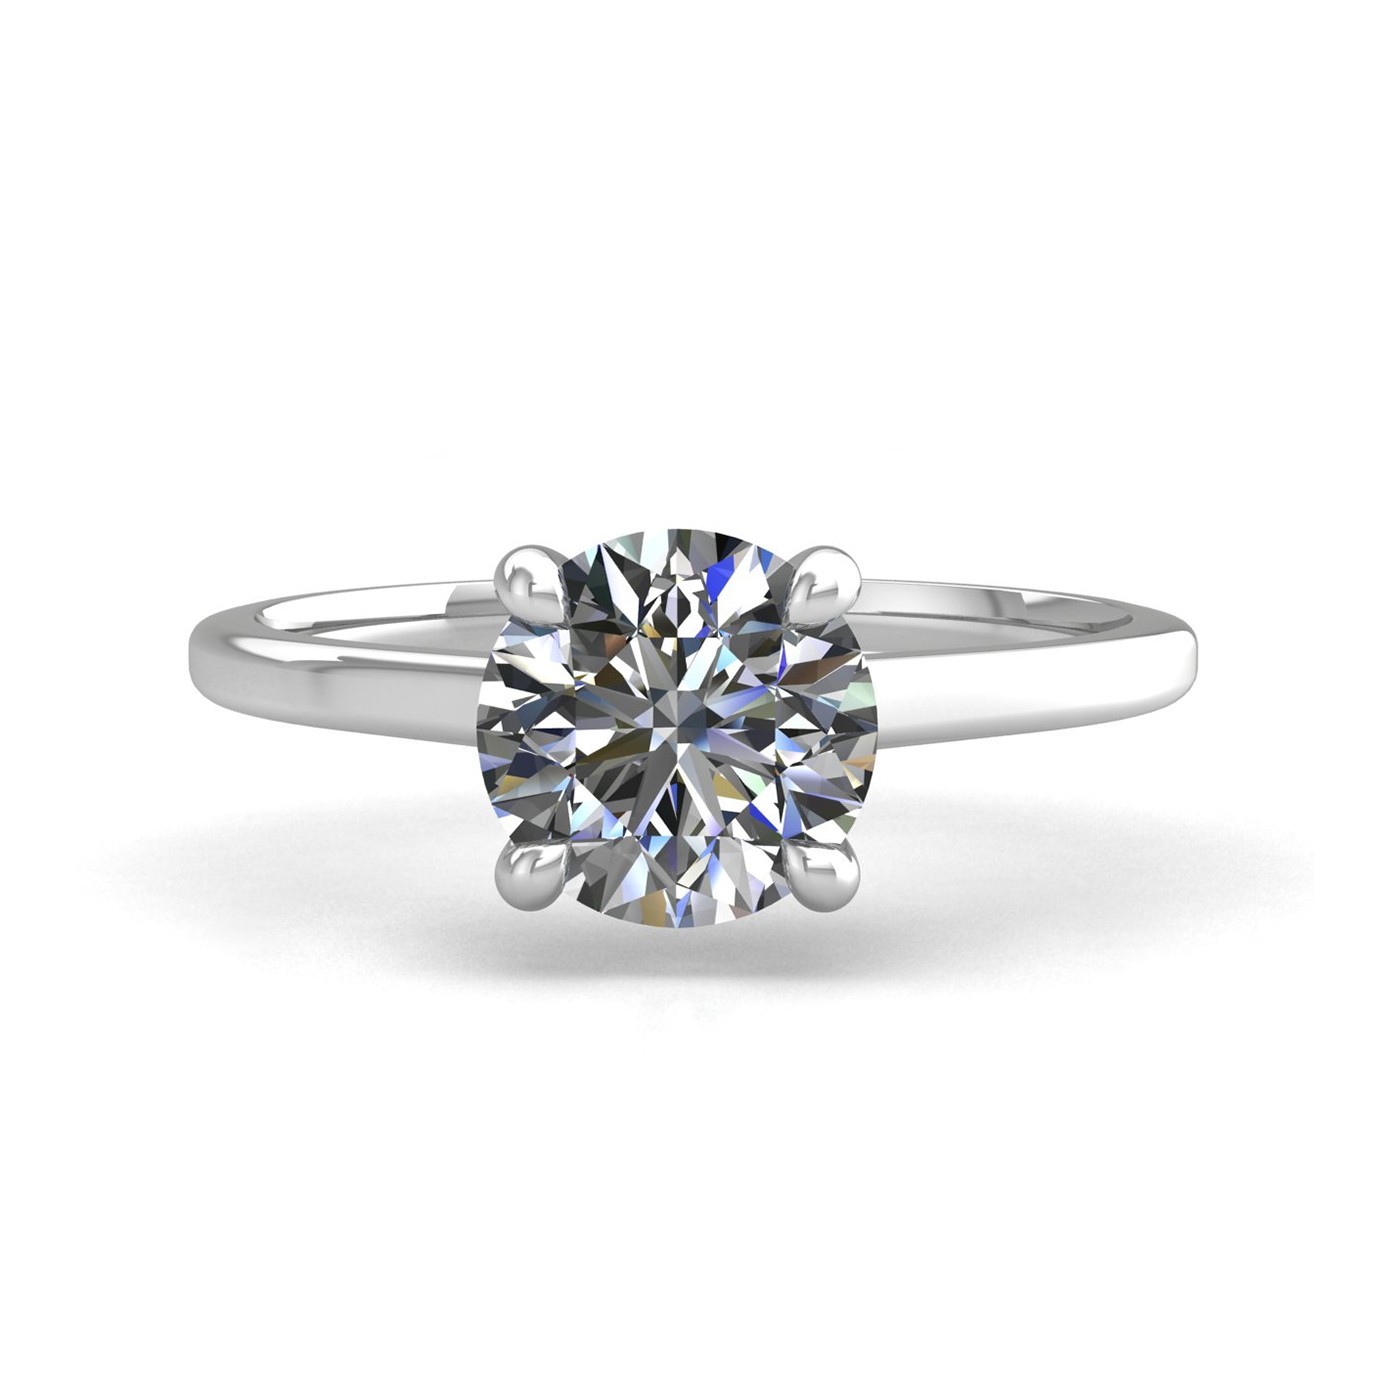 18K WHITE GOLD 4 PRONGS SOLITAIRE ROUND CUT DIAMOND ENGAGEMENT RING WITH WHISPER THIN BAND